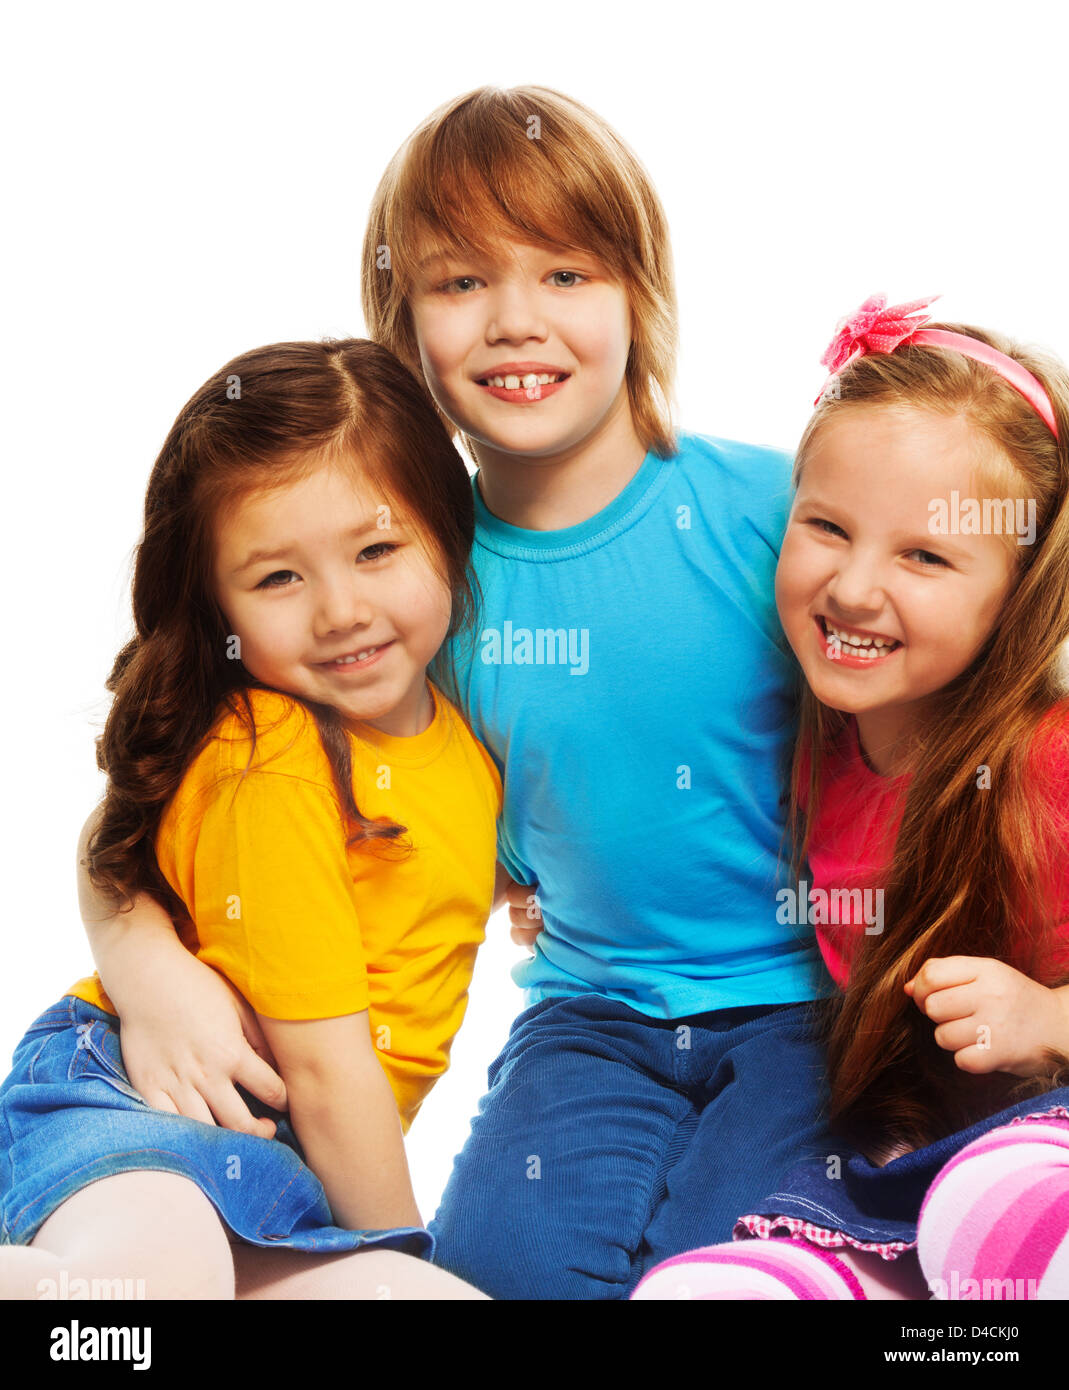 Closeup of a group of three kids, two girls and boy together, diversity looking happy, laughing, hugging, sitting isolated on white Stock Photo